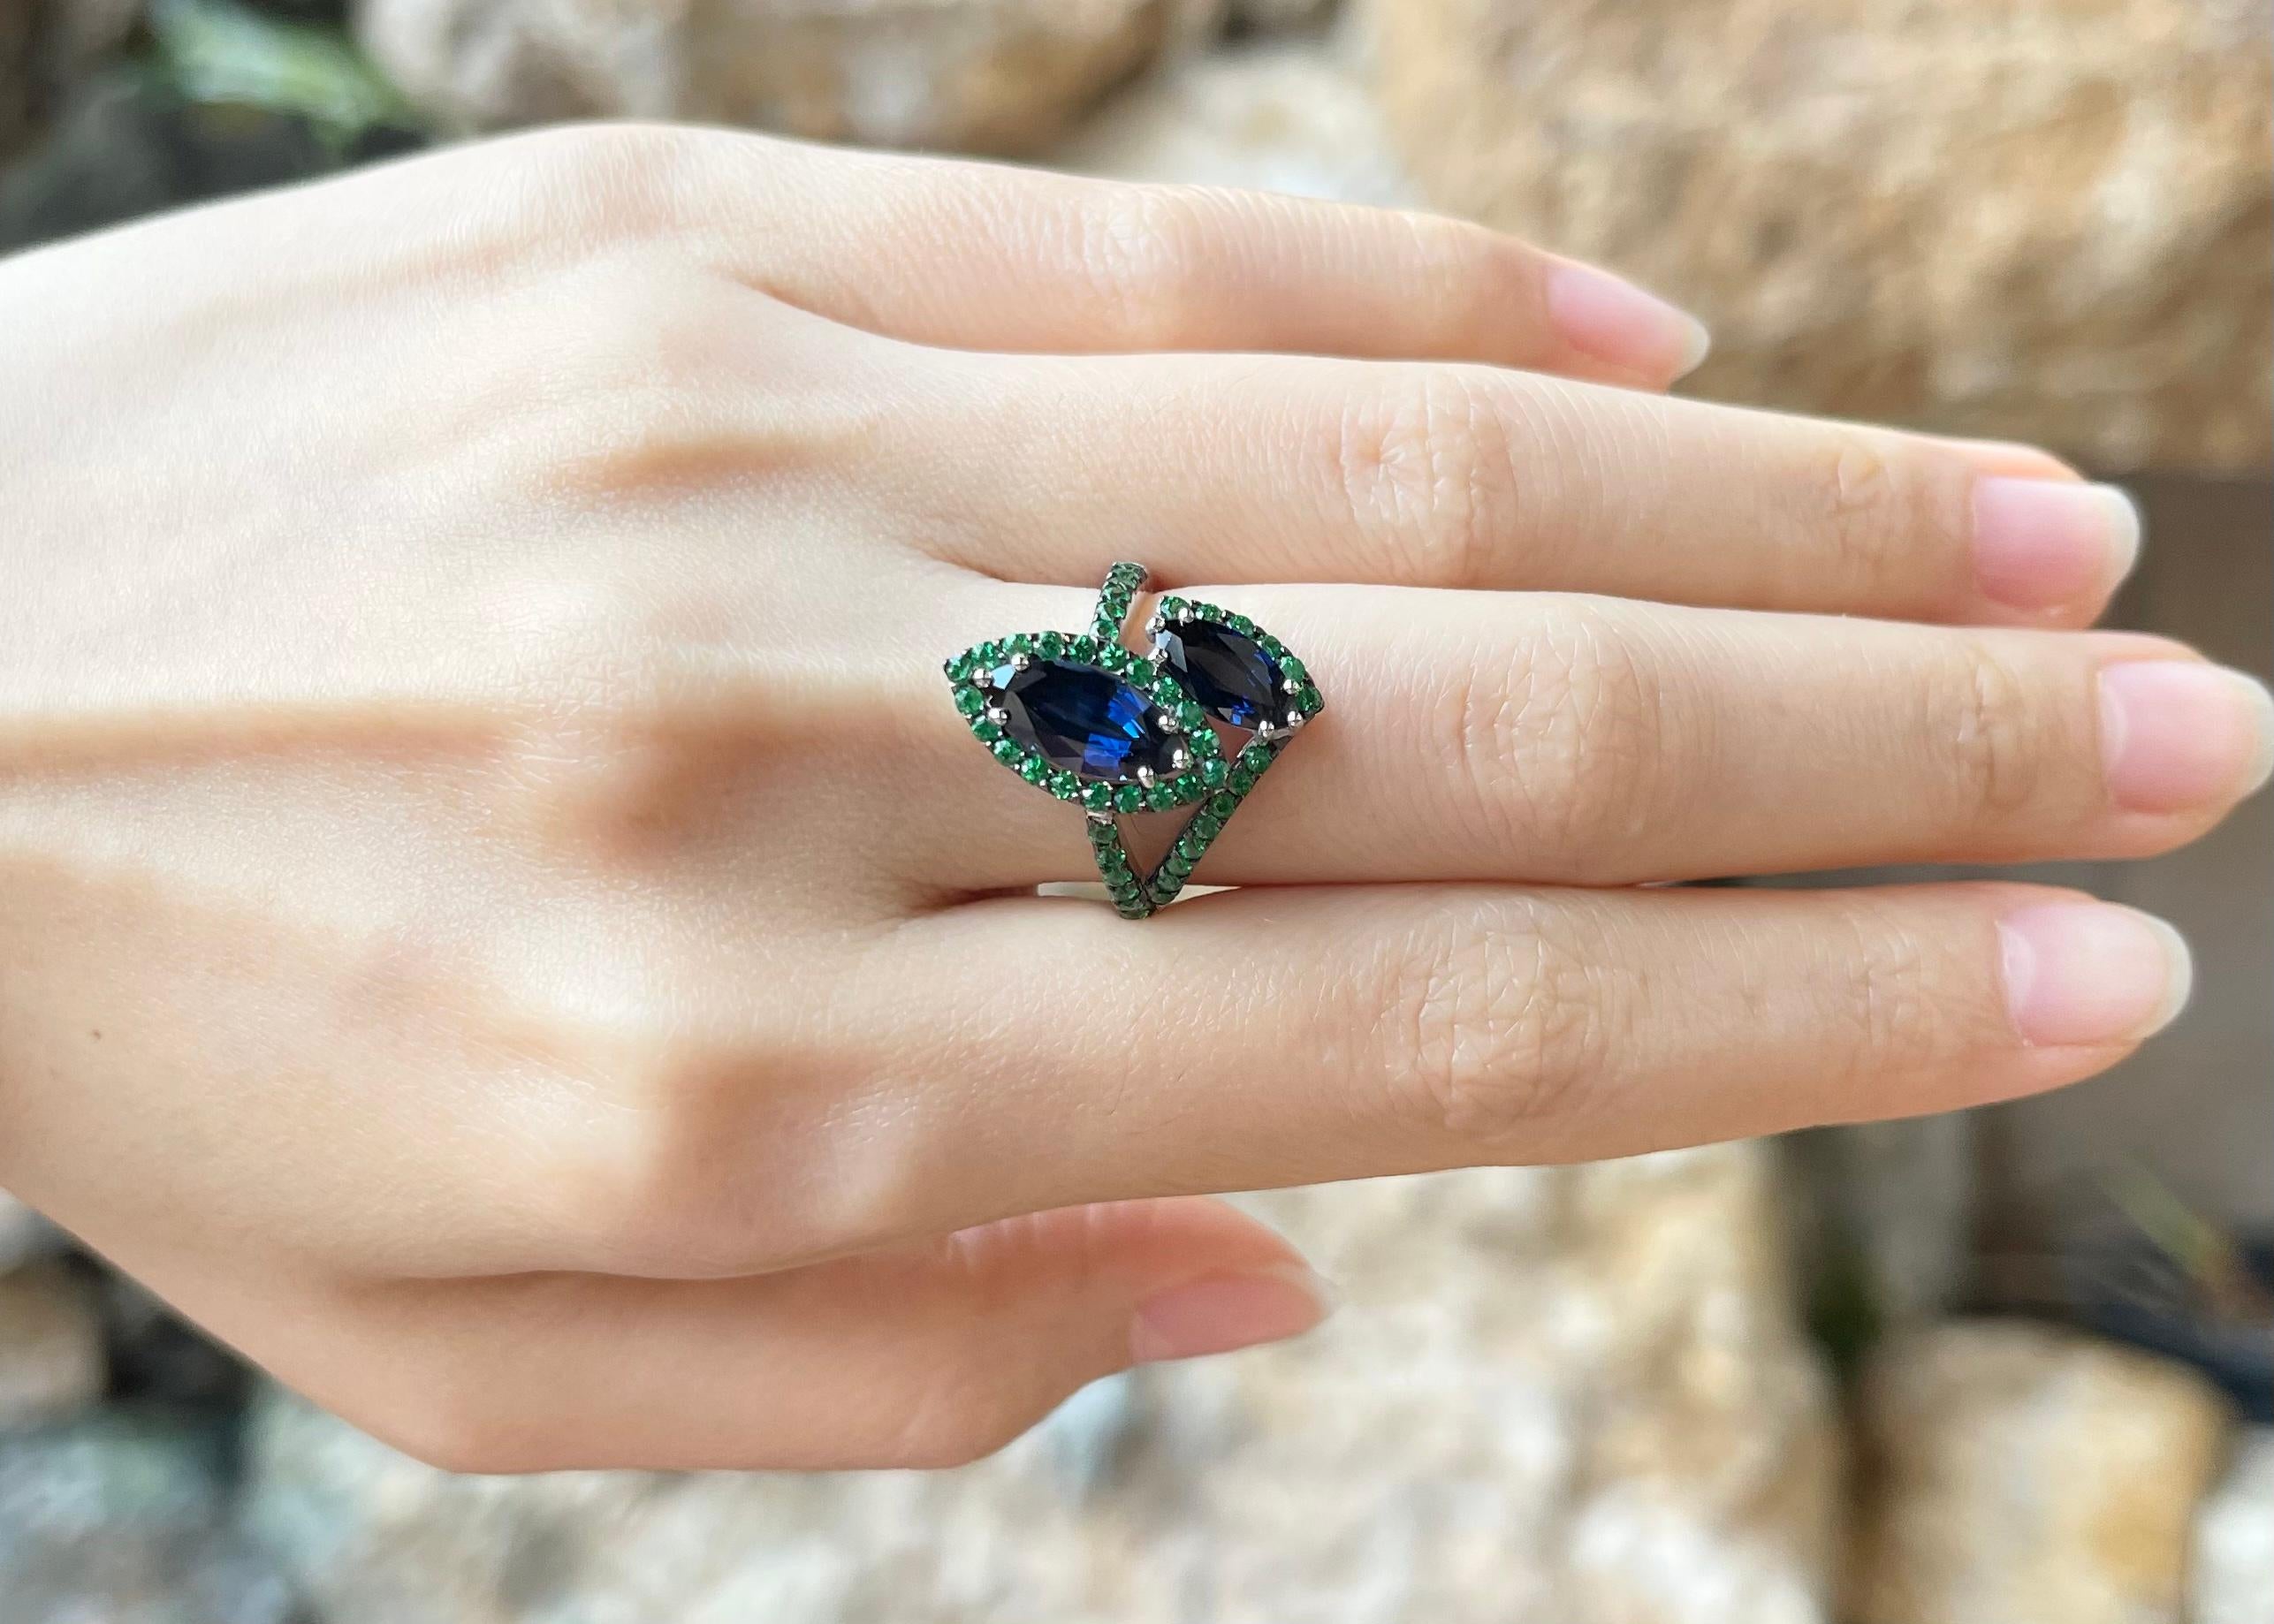 Blue Sapphire 3.01 carats with Tsavorite 0.83 carat Ring set in 18K White Gold Settings

Width:  1.3 cm 
Length: 2.0 cm
Ring Size: 52
Total Weight: 6.01 grams

